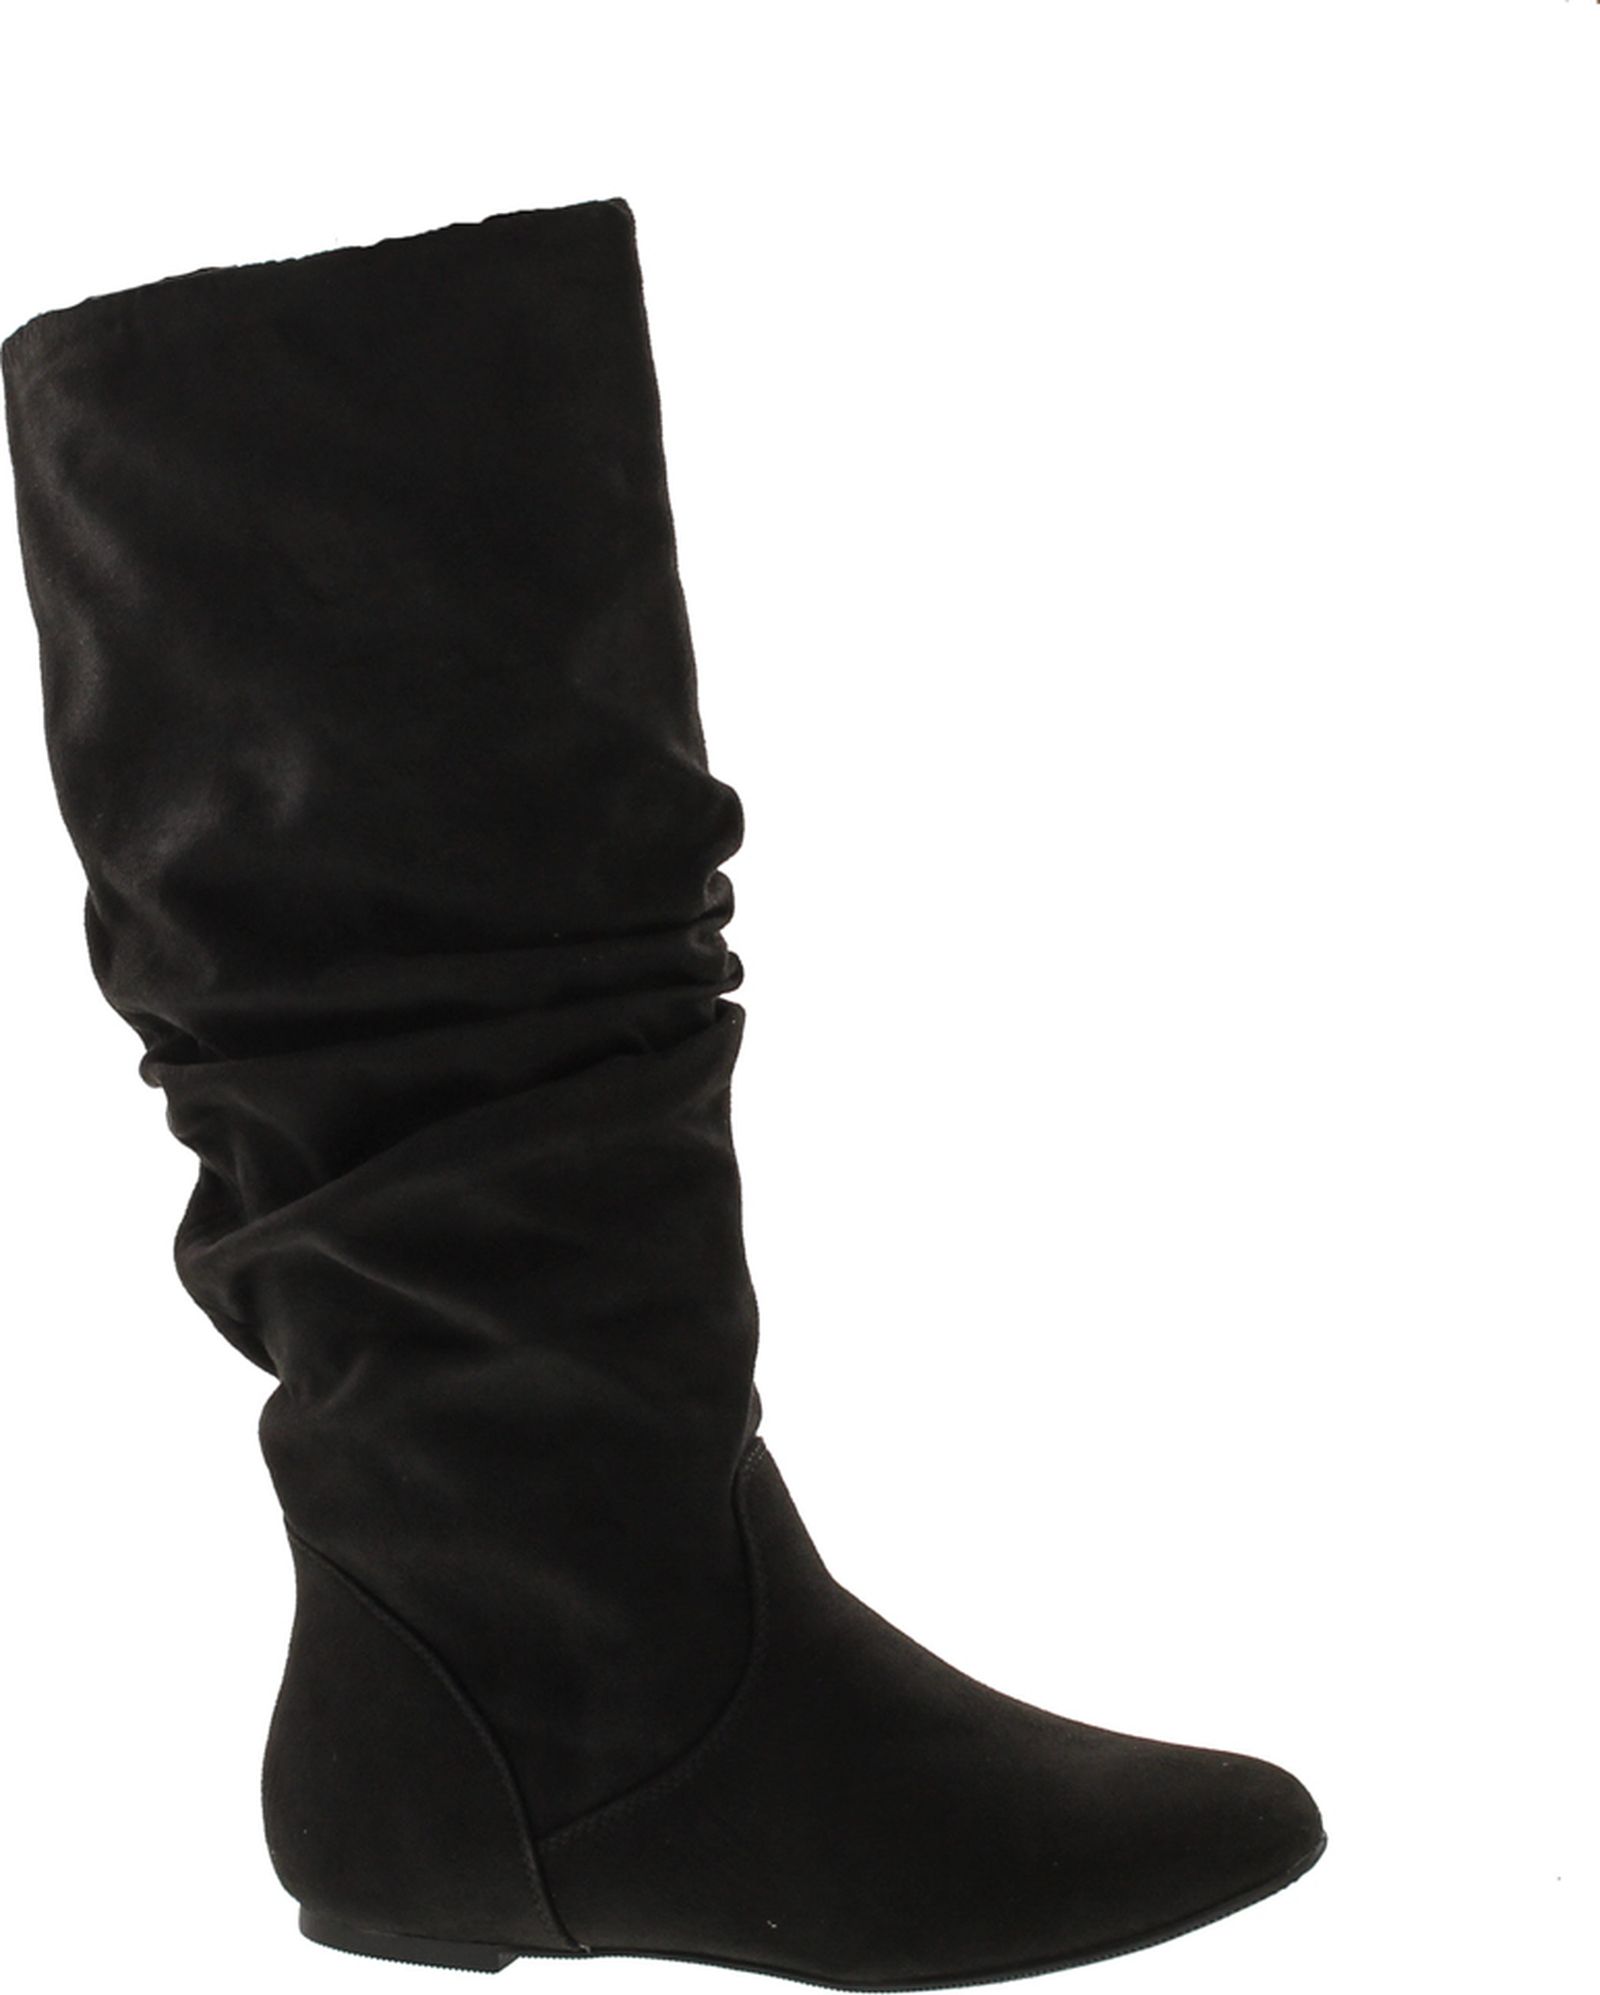 West Blvd Saigon Slouch Slouch Boots